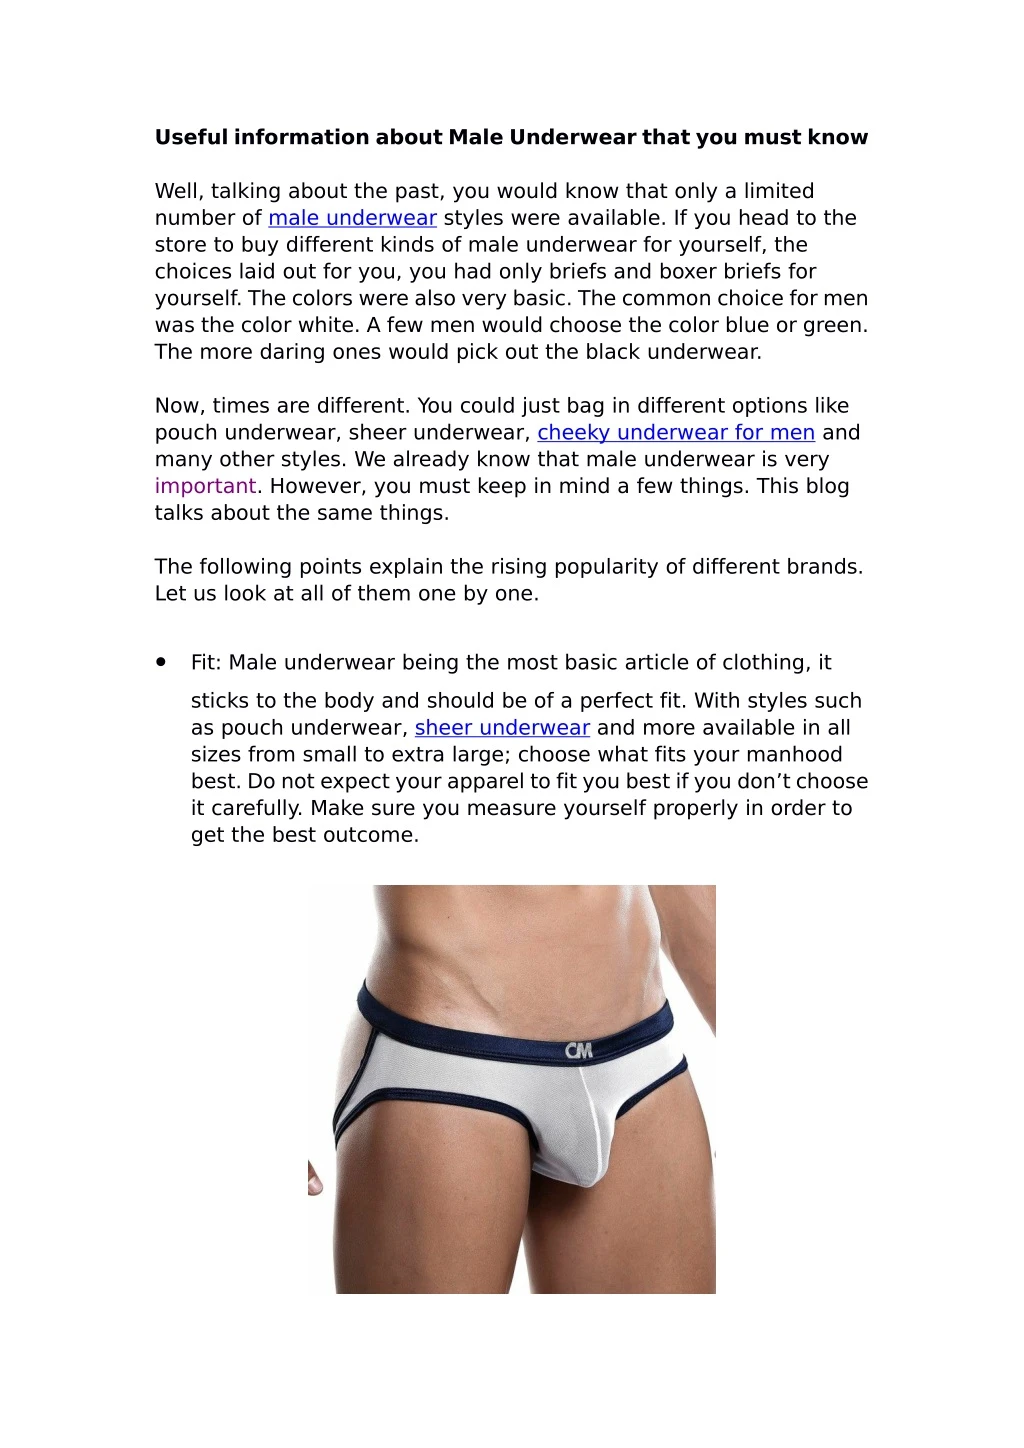 useful information about male underwear that